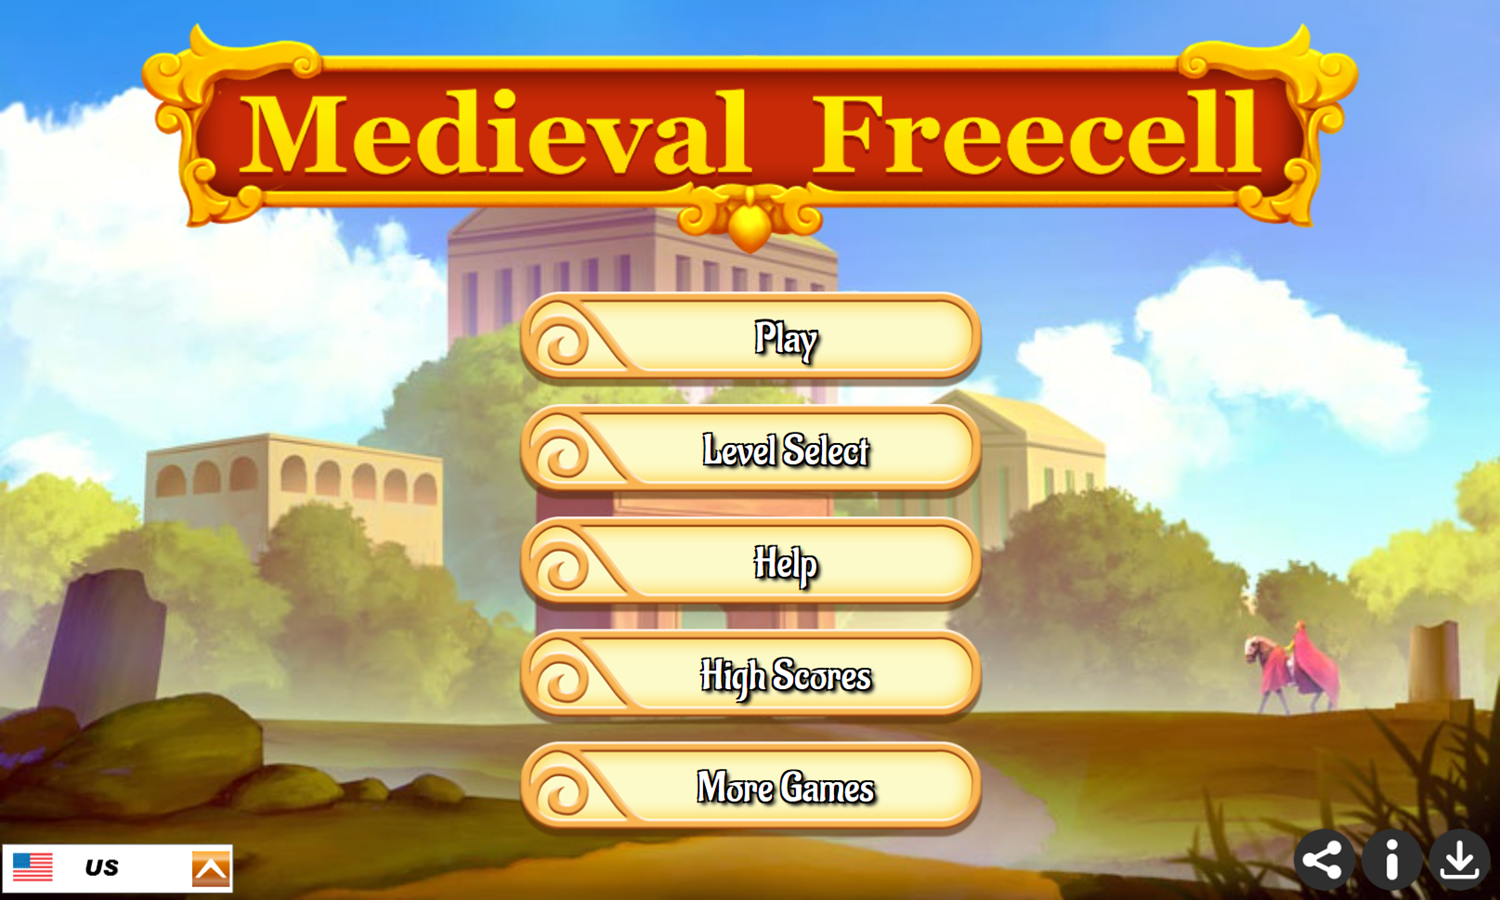 Medieval Freecell Game Welcome Screen Screenshot.